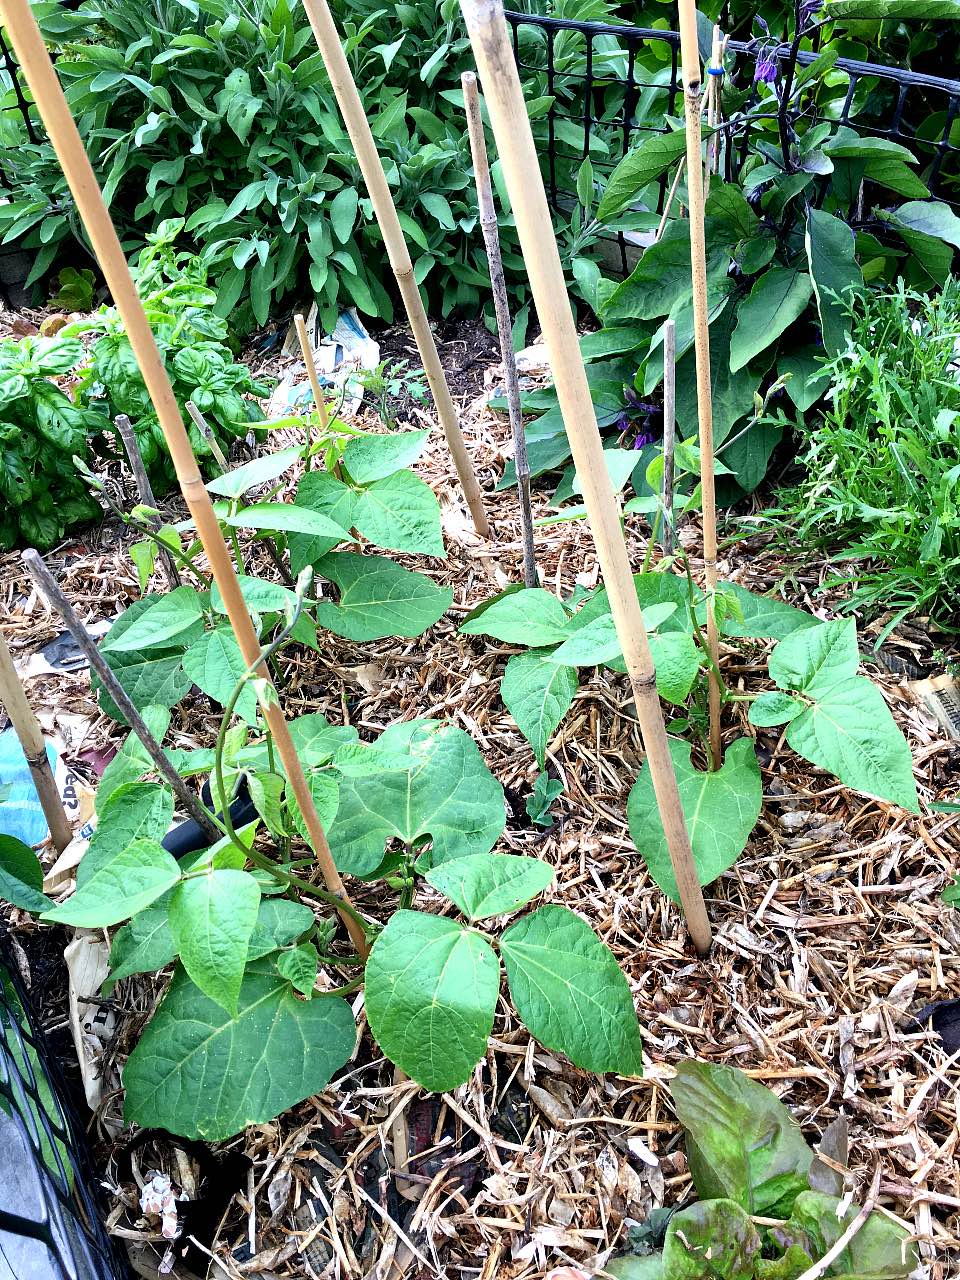 Beans growing nicely.